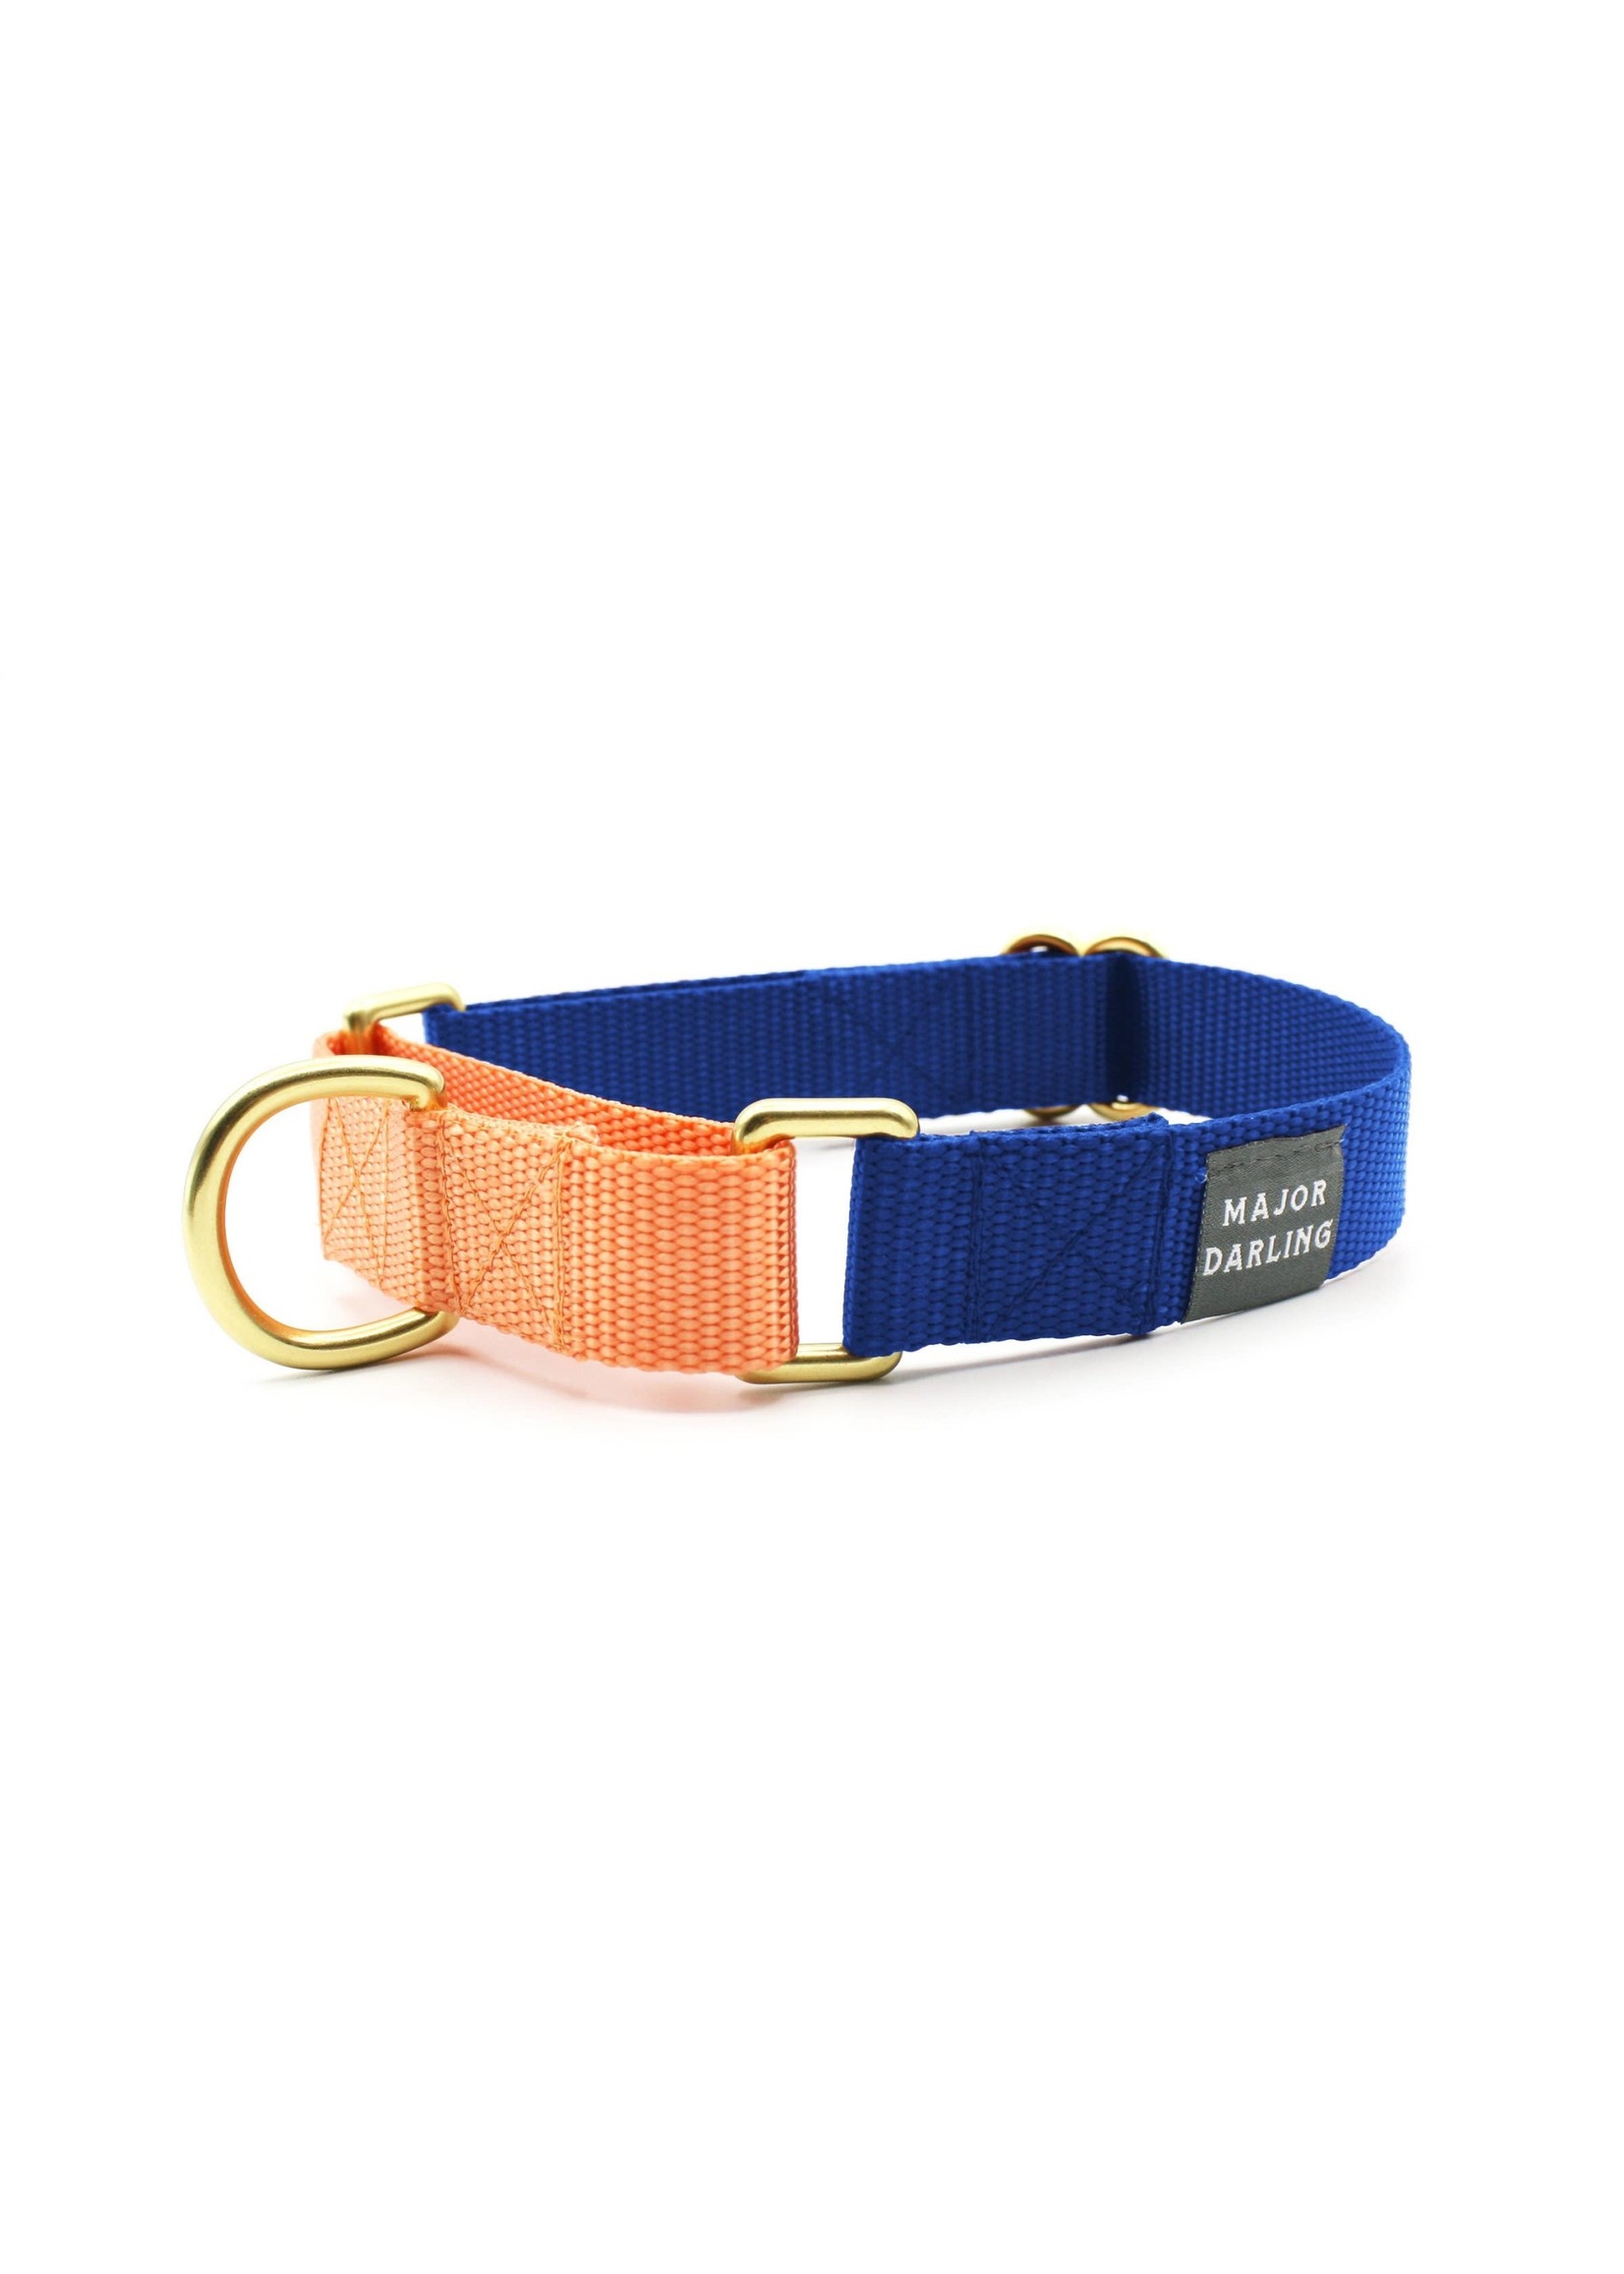 Major Darling Cobalt with Peach Martingale Collar